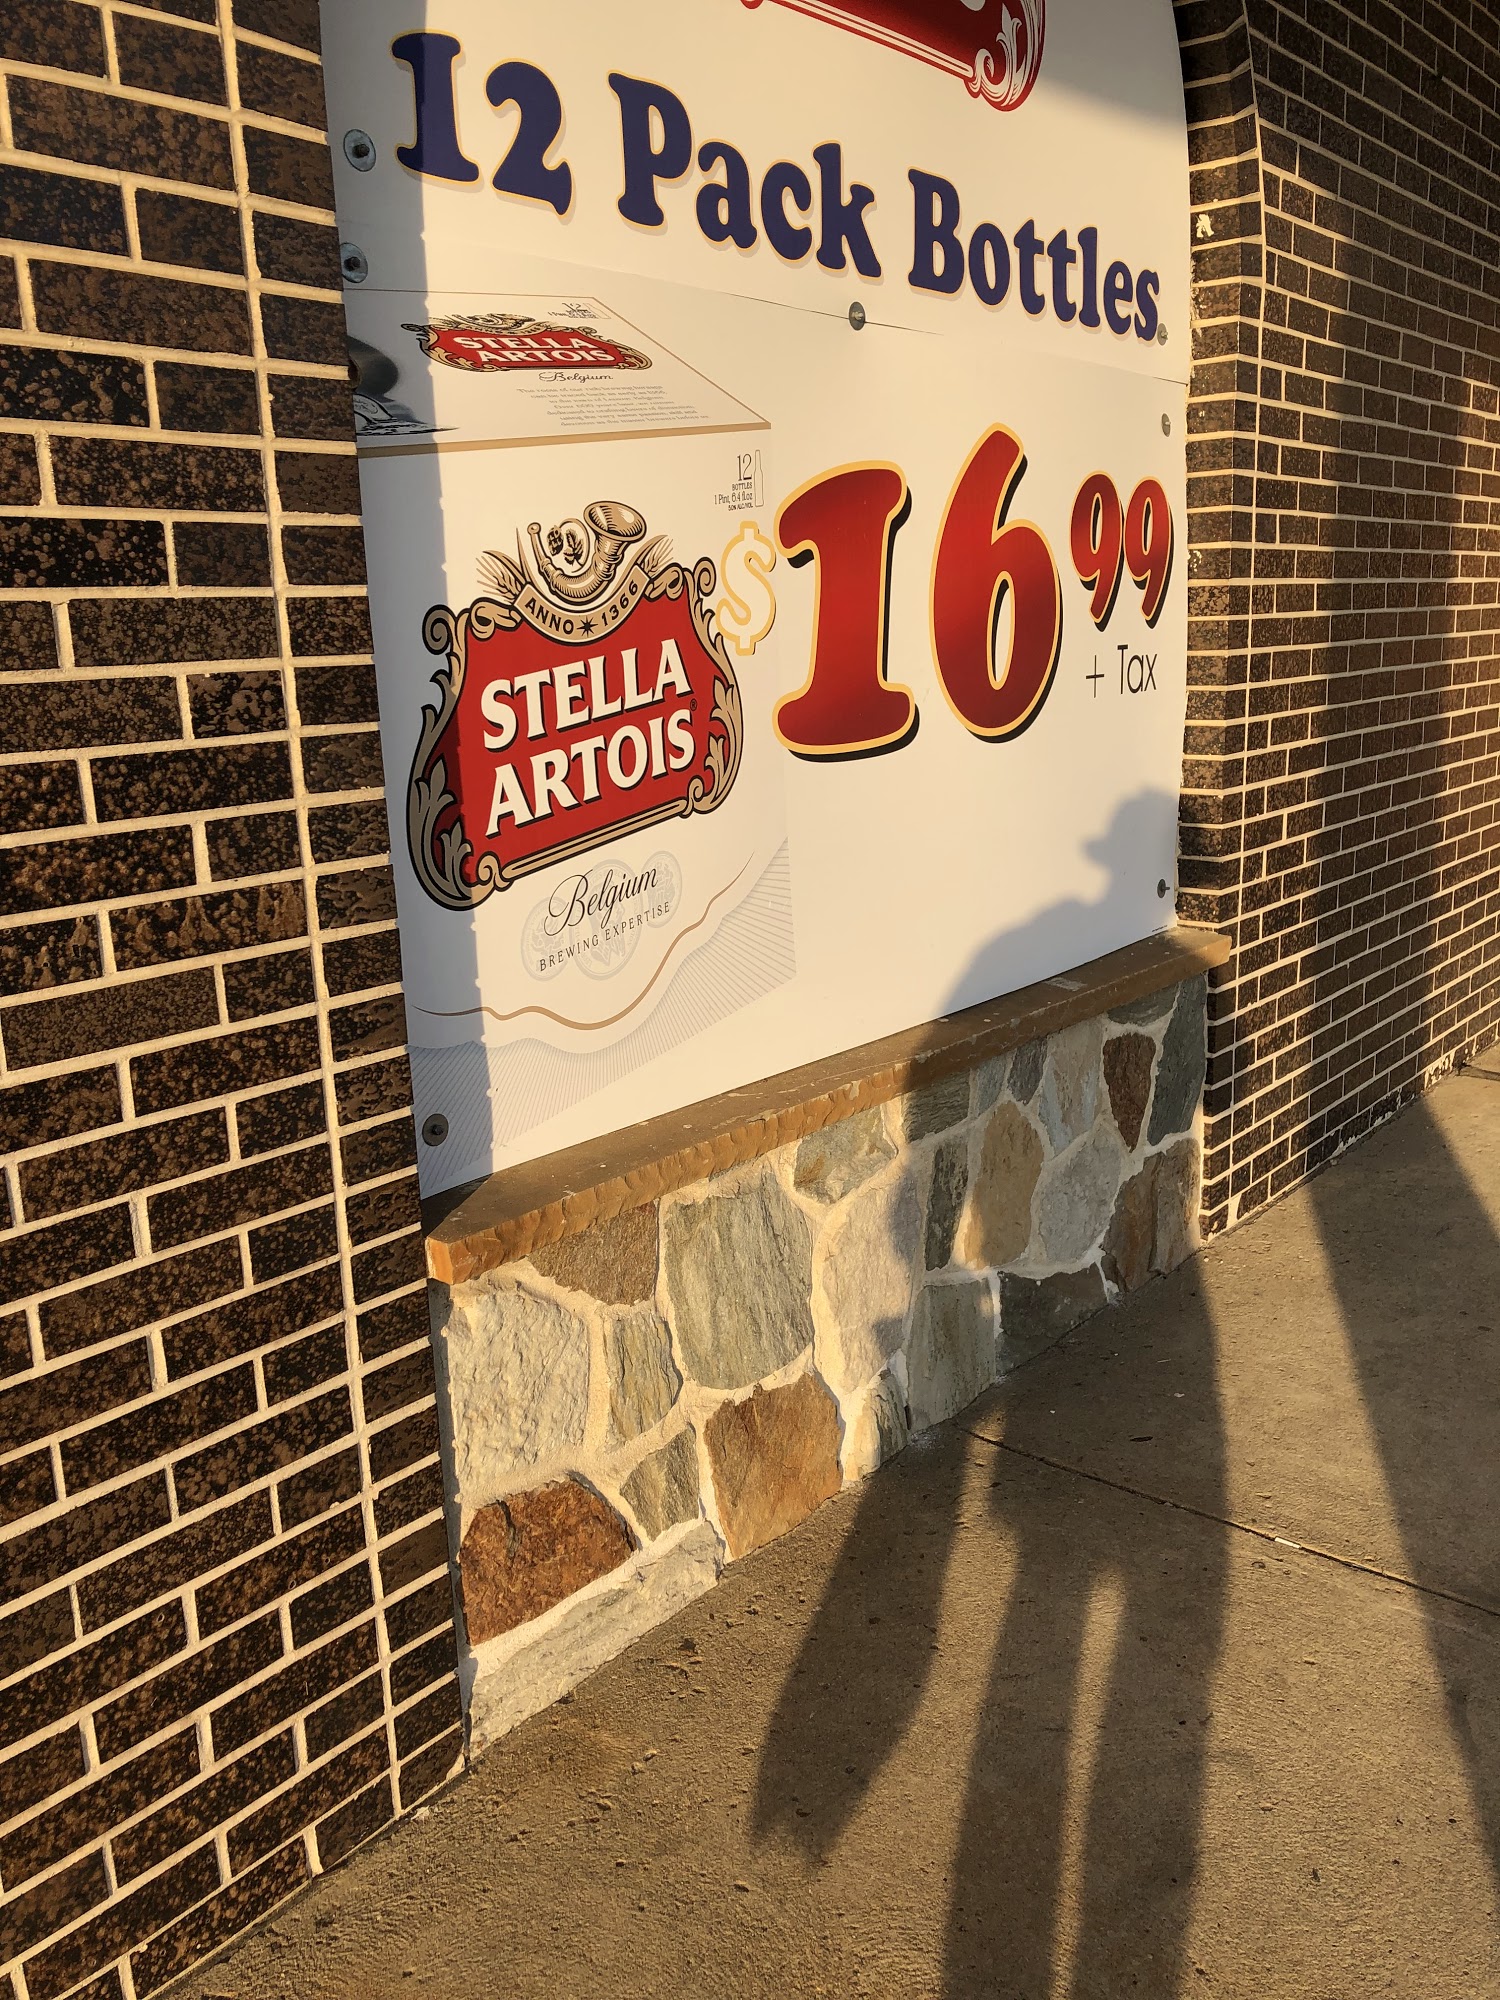 Heights Liquor Outlet